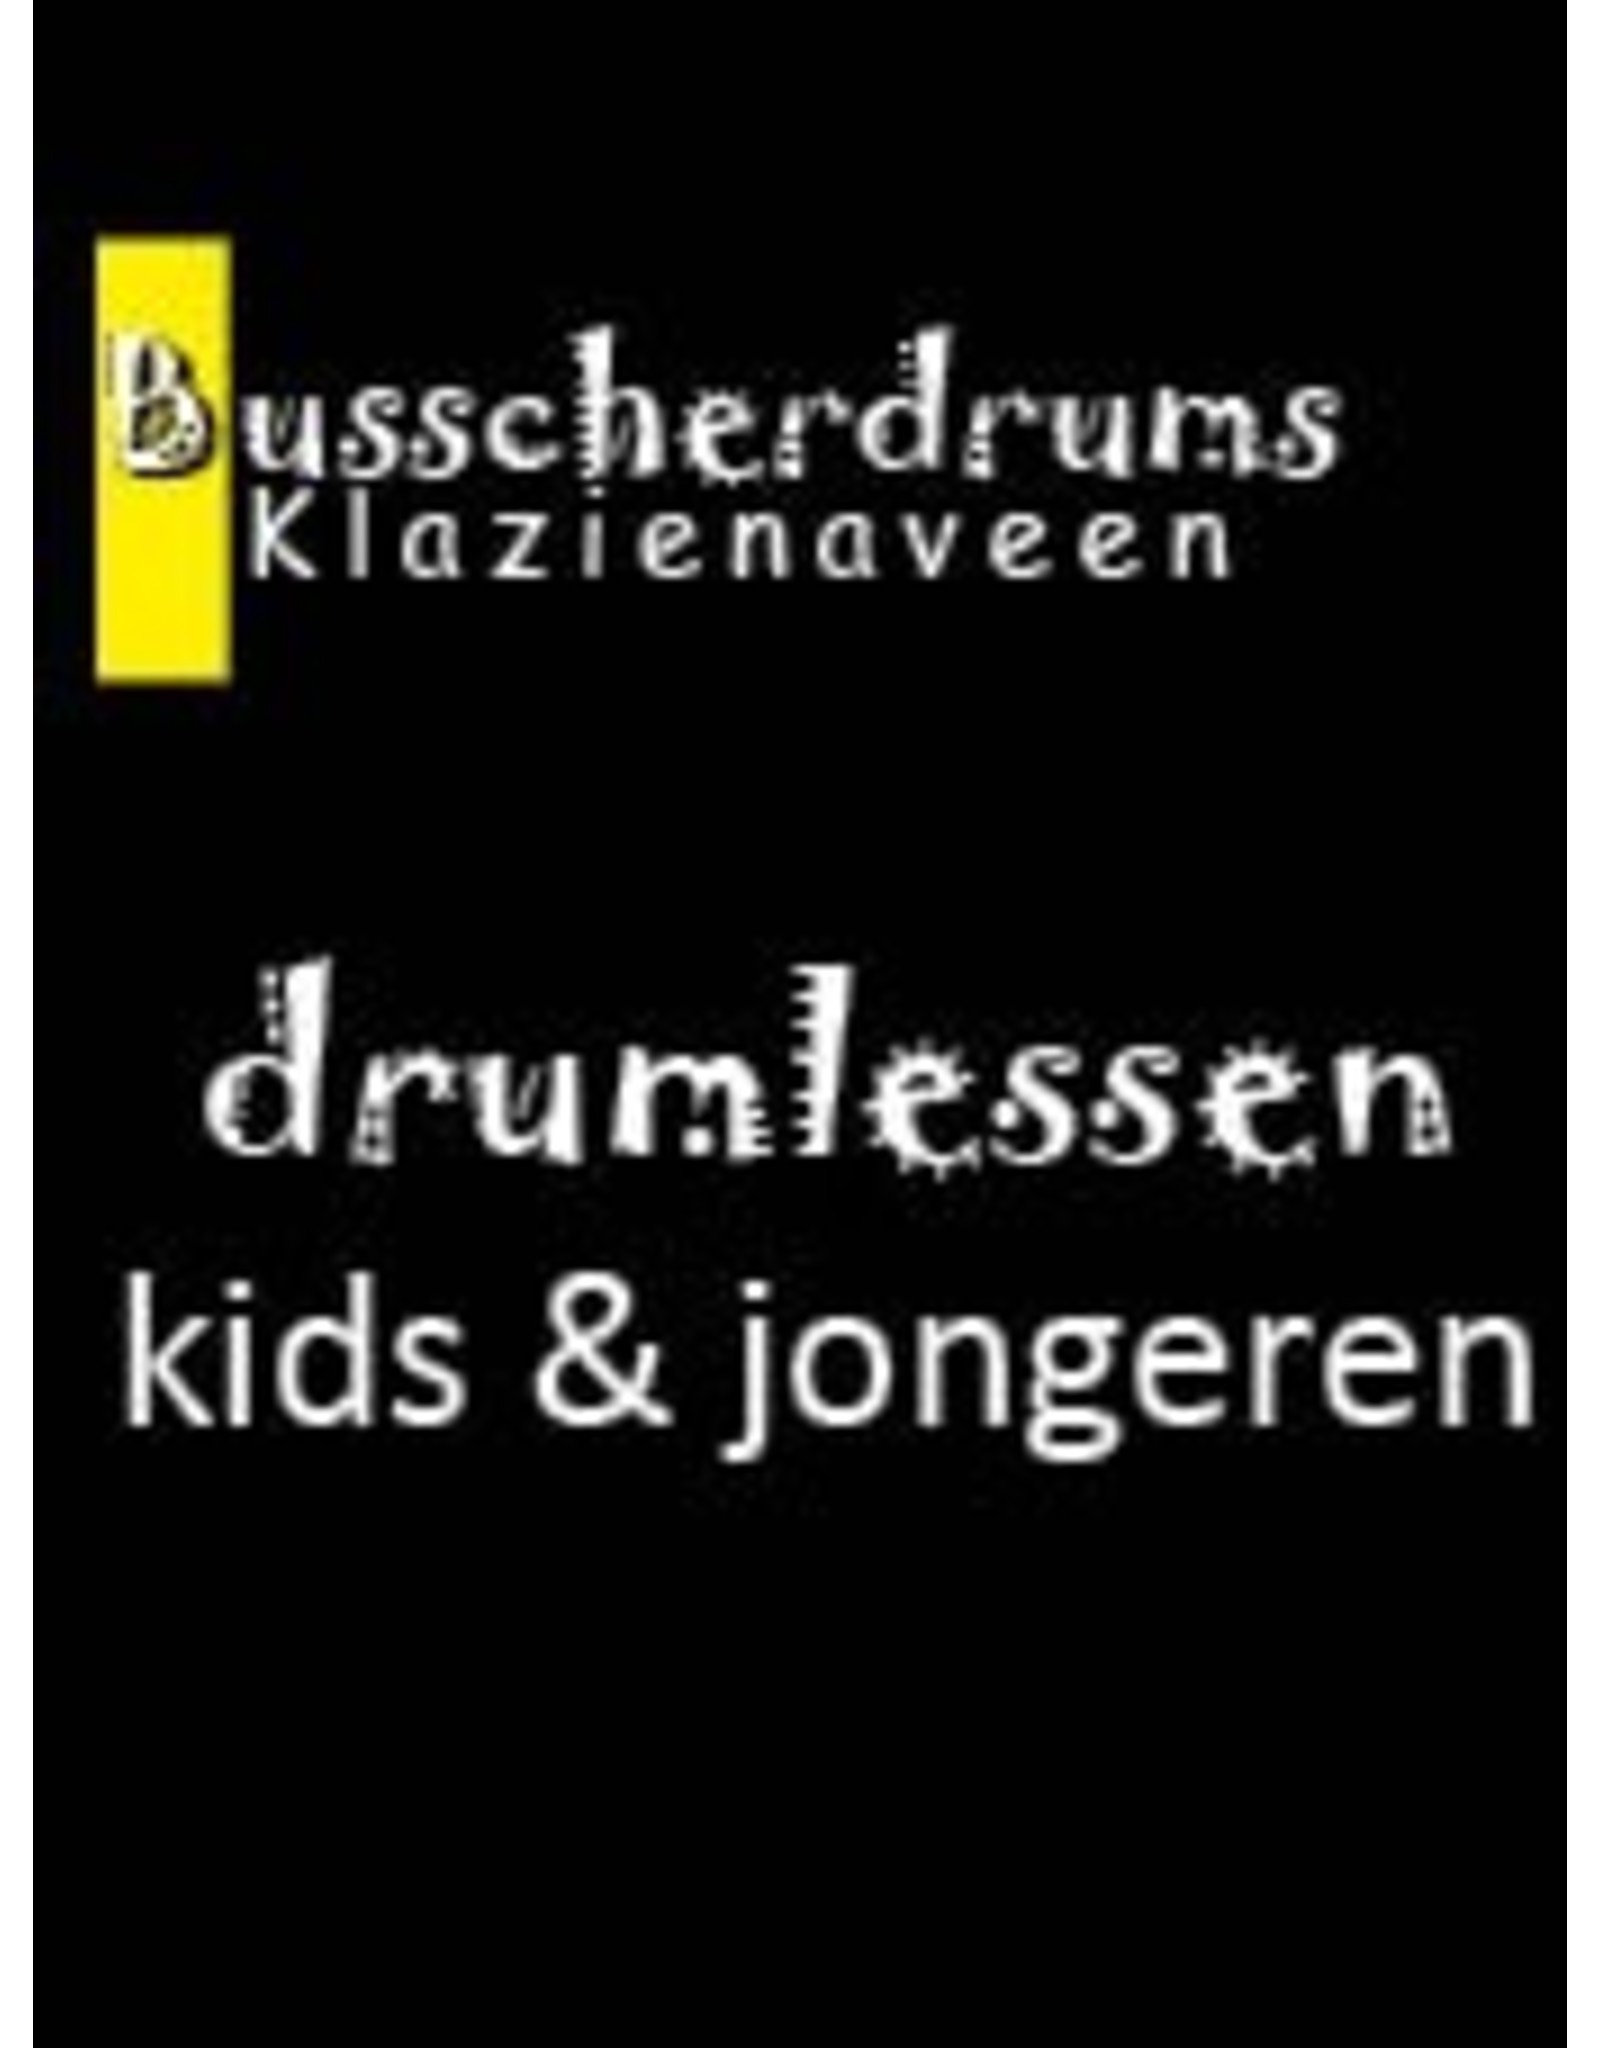 Busscherdrums Drum Lessons card 19 x 30 minutes 1 x per 14 days 606 young people lessons